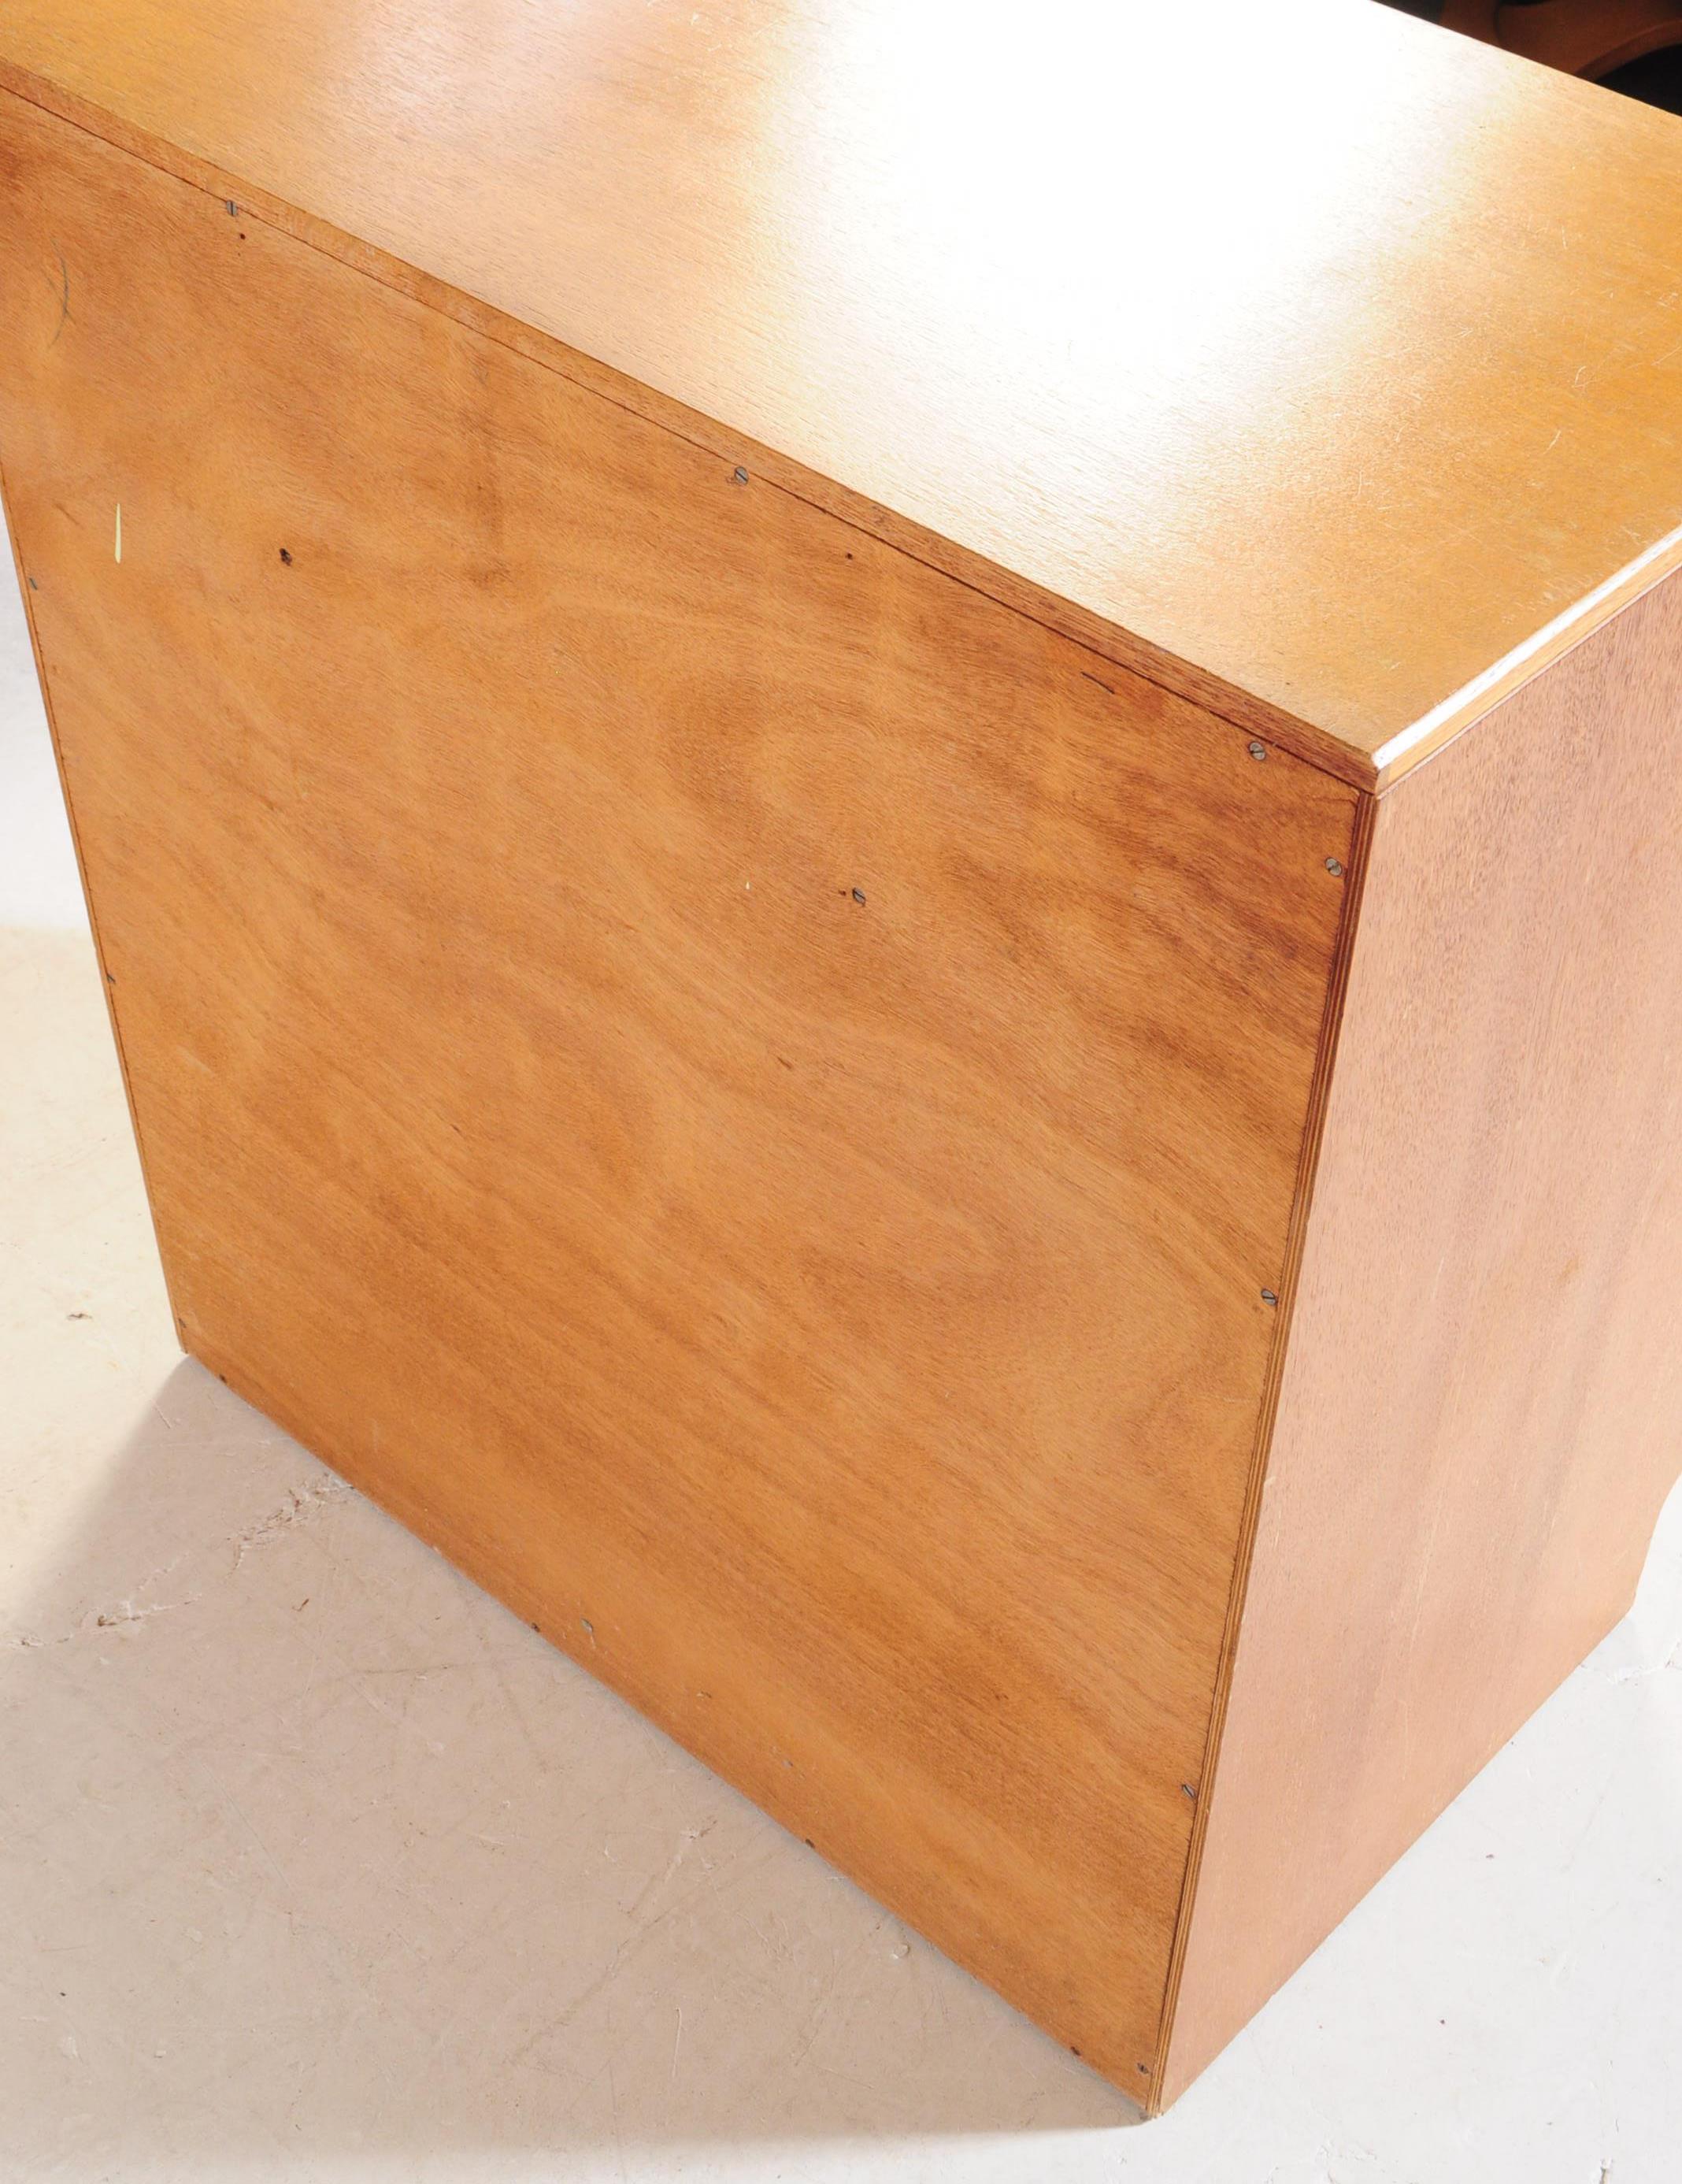 G-PLAN - E. GOMME - MID CENTURY BRANDON CHEST OF DRAWERS - Image 7 of 7